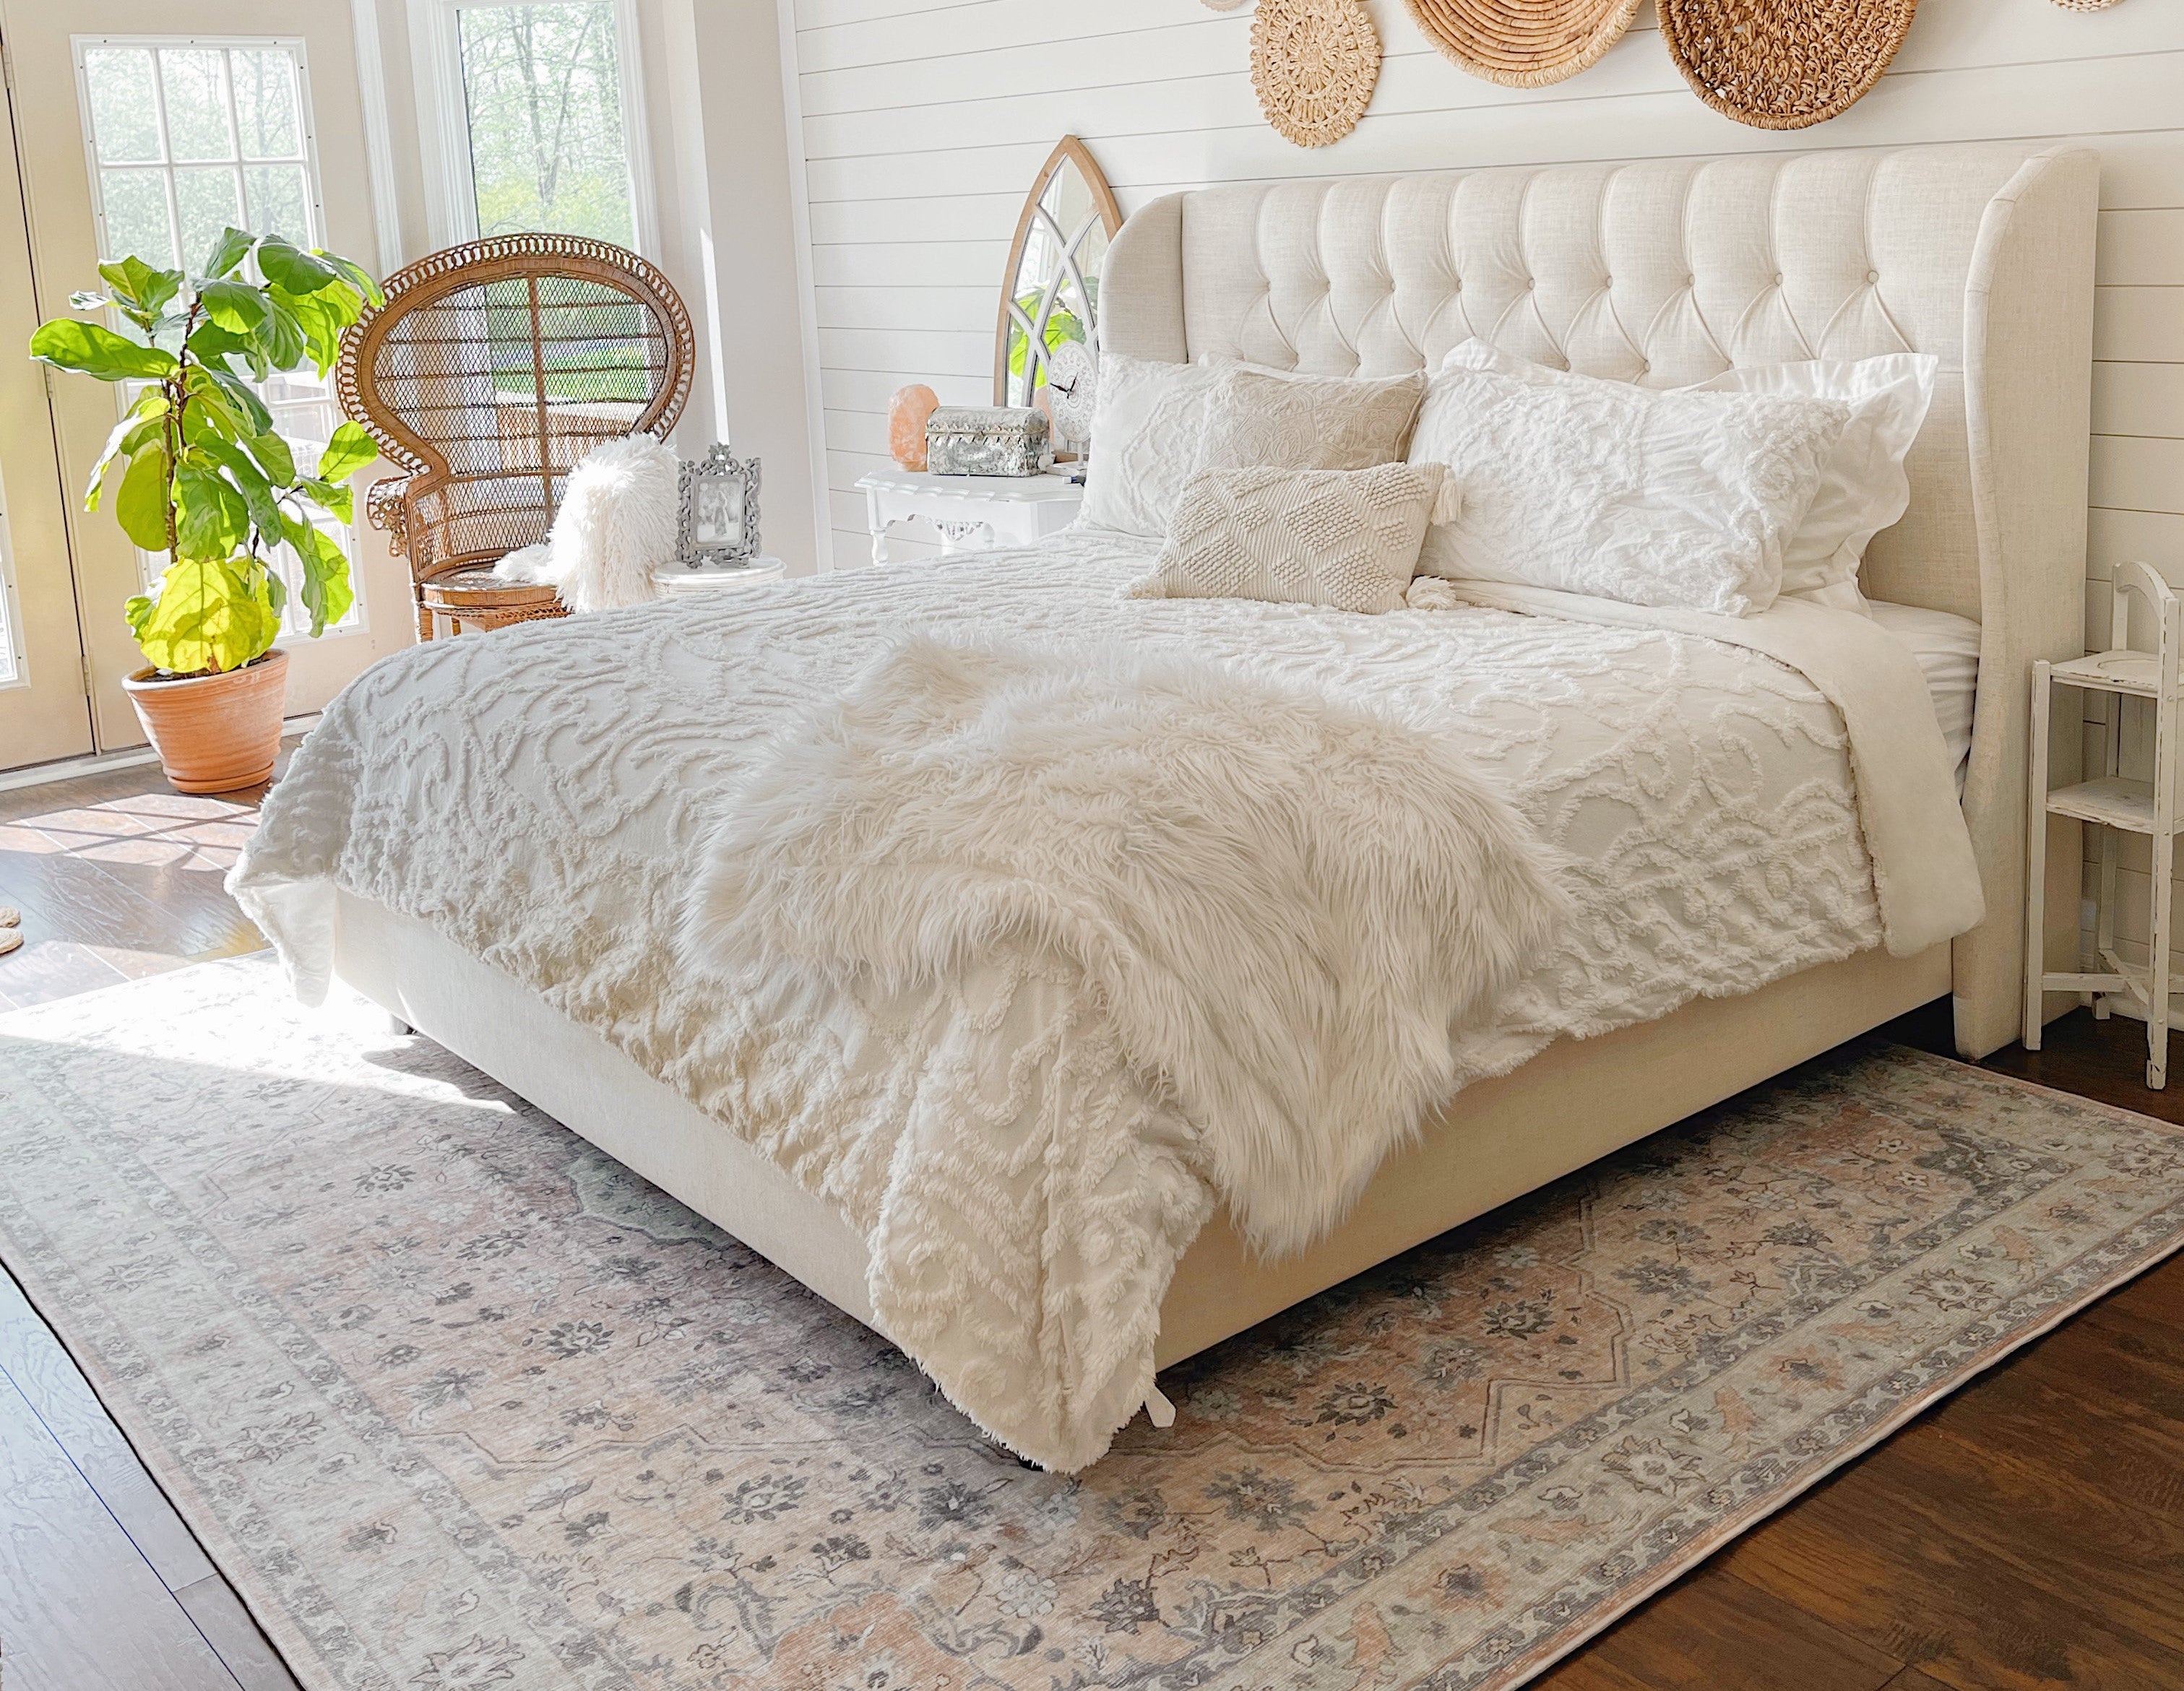 What Size Rug Should Go Under a King Bed?